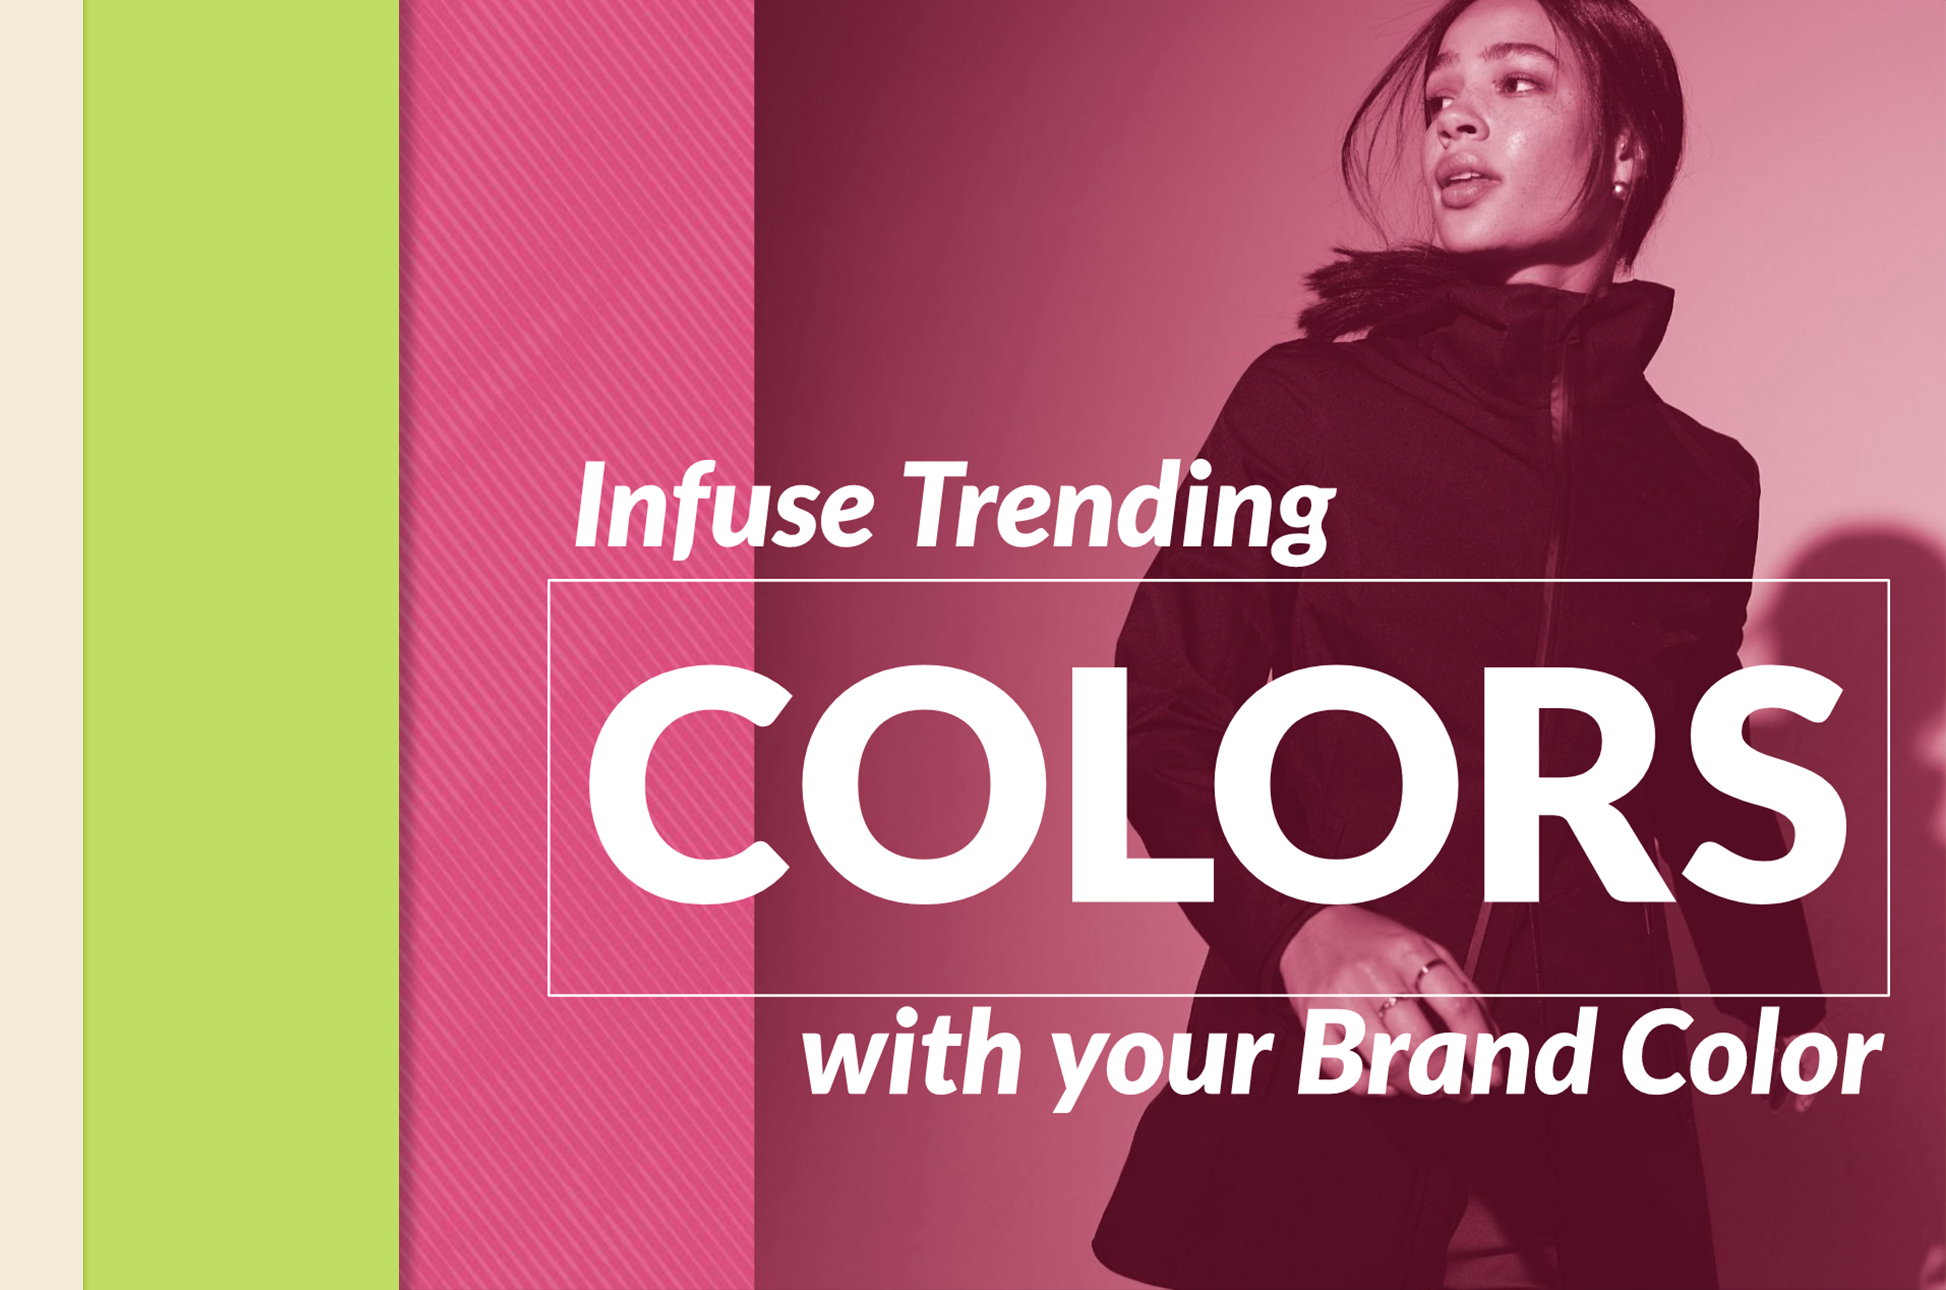 Infuse Trending Colors with Your Brand Color